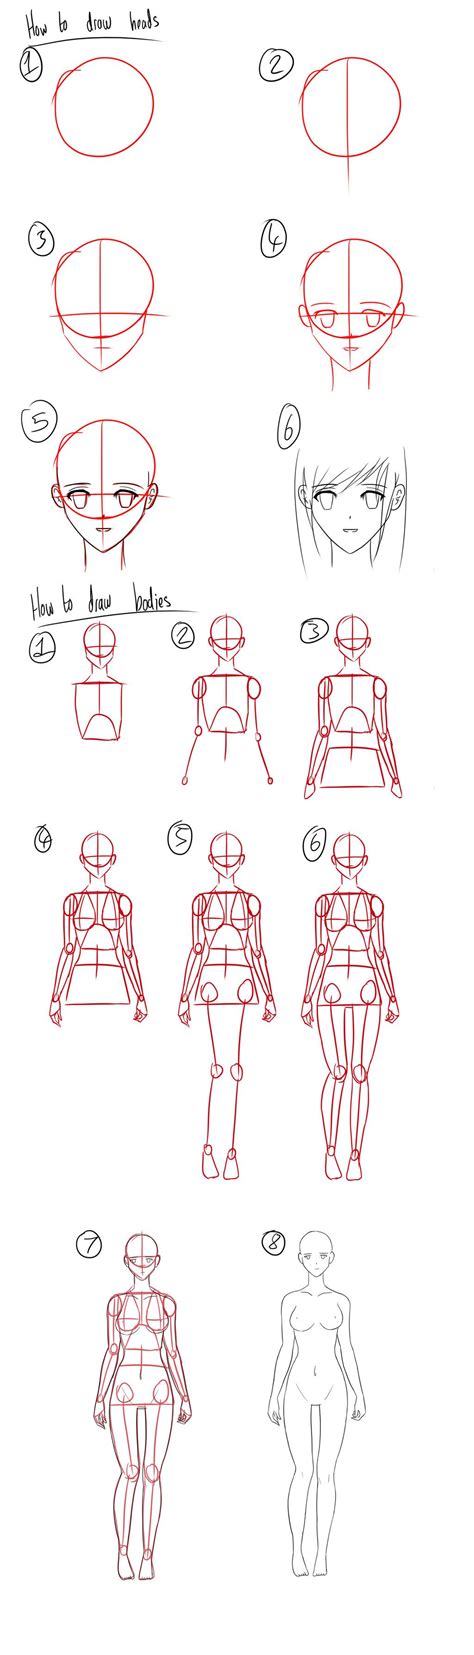 Draw anime character tutorial step by step lesson 08: Tutorial | Drawing anime bodies, Anime head, Manga drawing